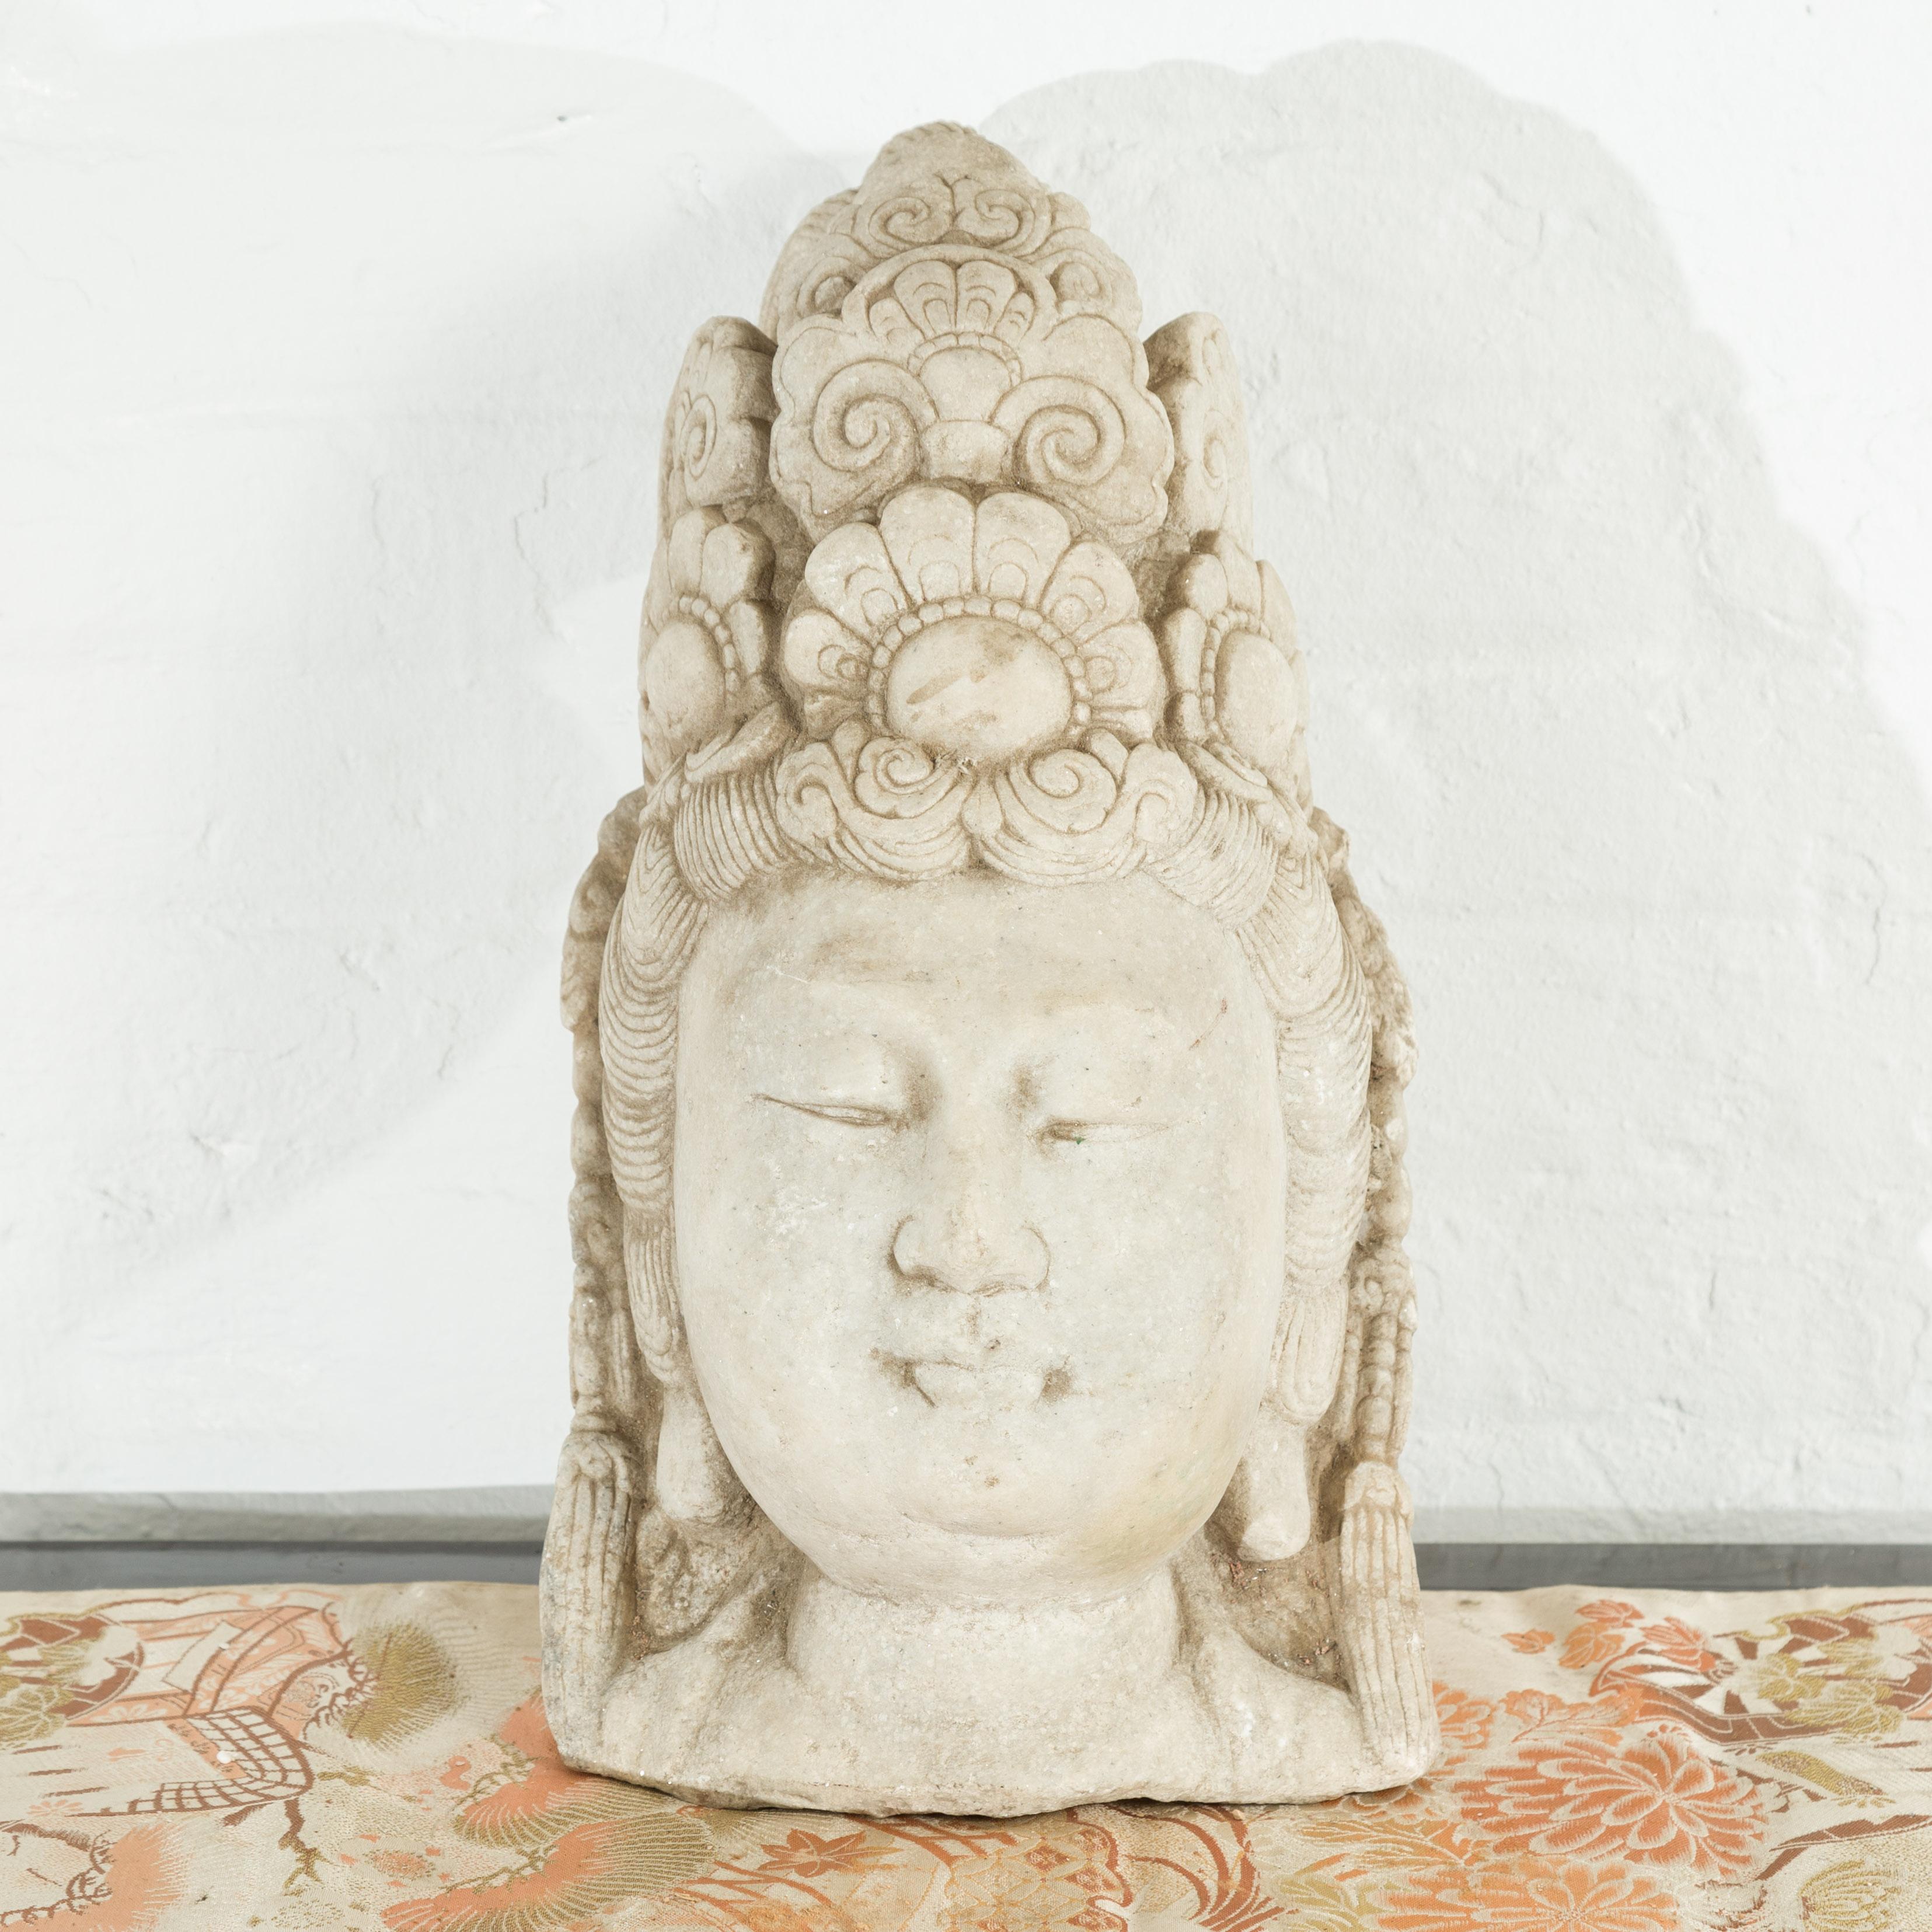 A Chinese vintage carved stone bust of Guanyin from the mid 20th century, with ornate headdress. Created in China during the midcentury period, this carved stone bust captivates us with its calm depiction of Guanyin, Bodhisattva of Compassion.